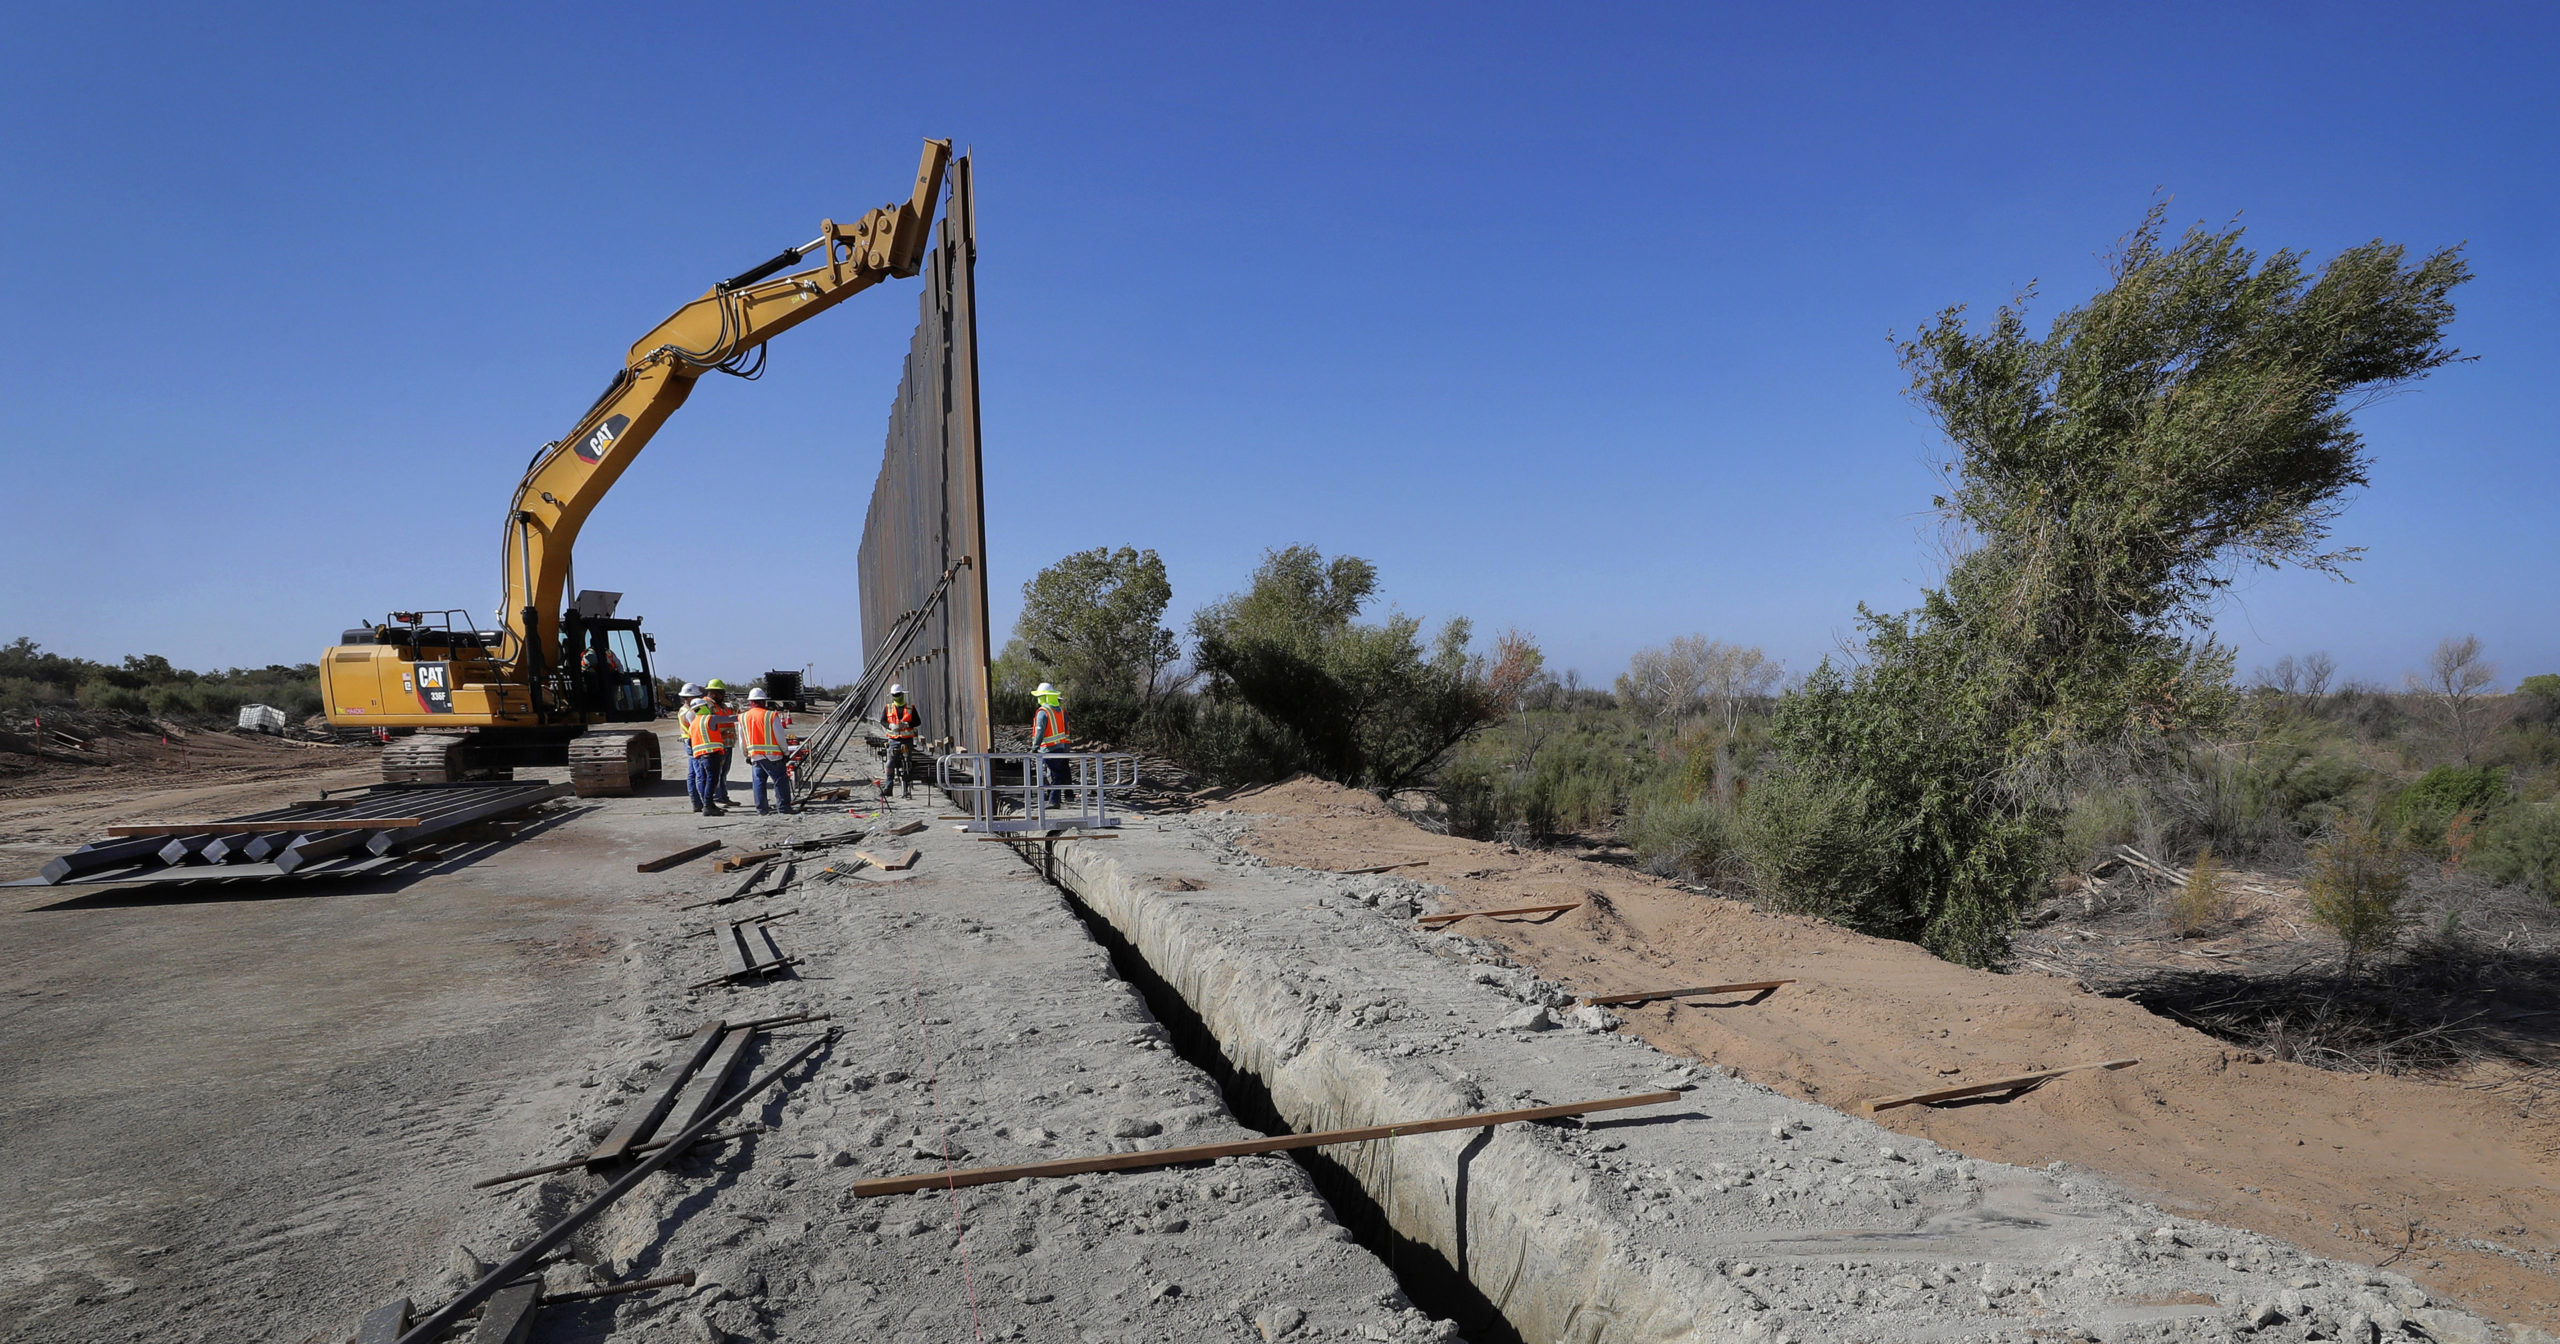 In this Sept. 10, 2019, file photo, government contractors erect a section of the border wall along the Colorado River in Yuma, Arizona. The federal Bureau of Land Management said on July 21, 2020, that it's transferred over 65 acres of public land in Arizona and New Mexico to the Army for construction of border wall infrastructure.